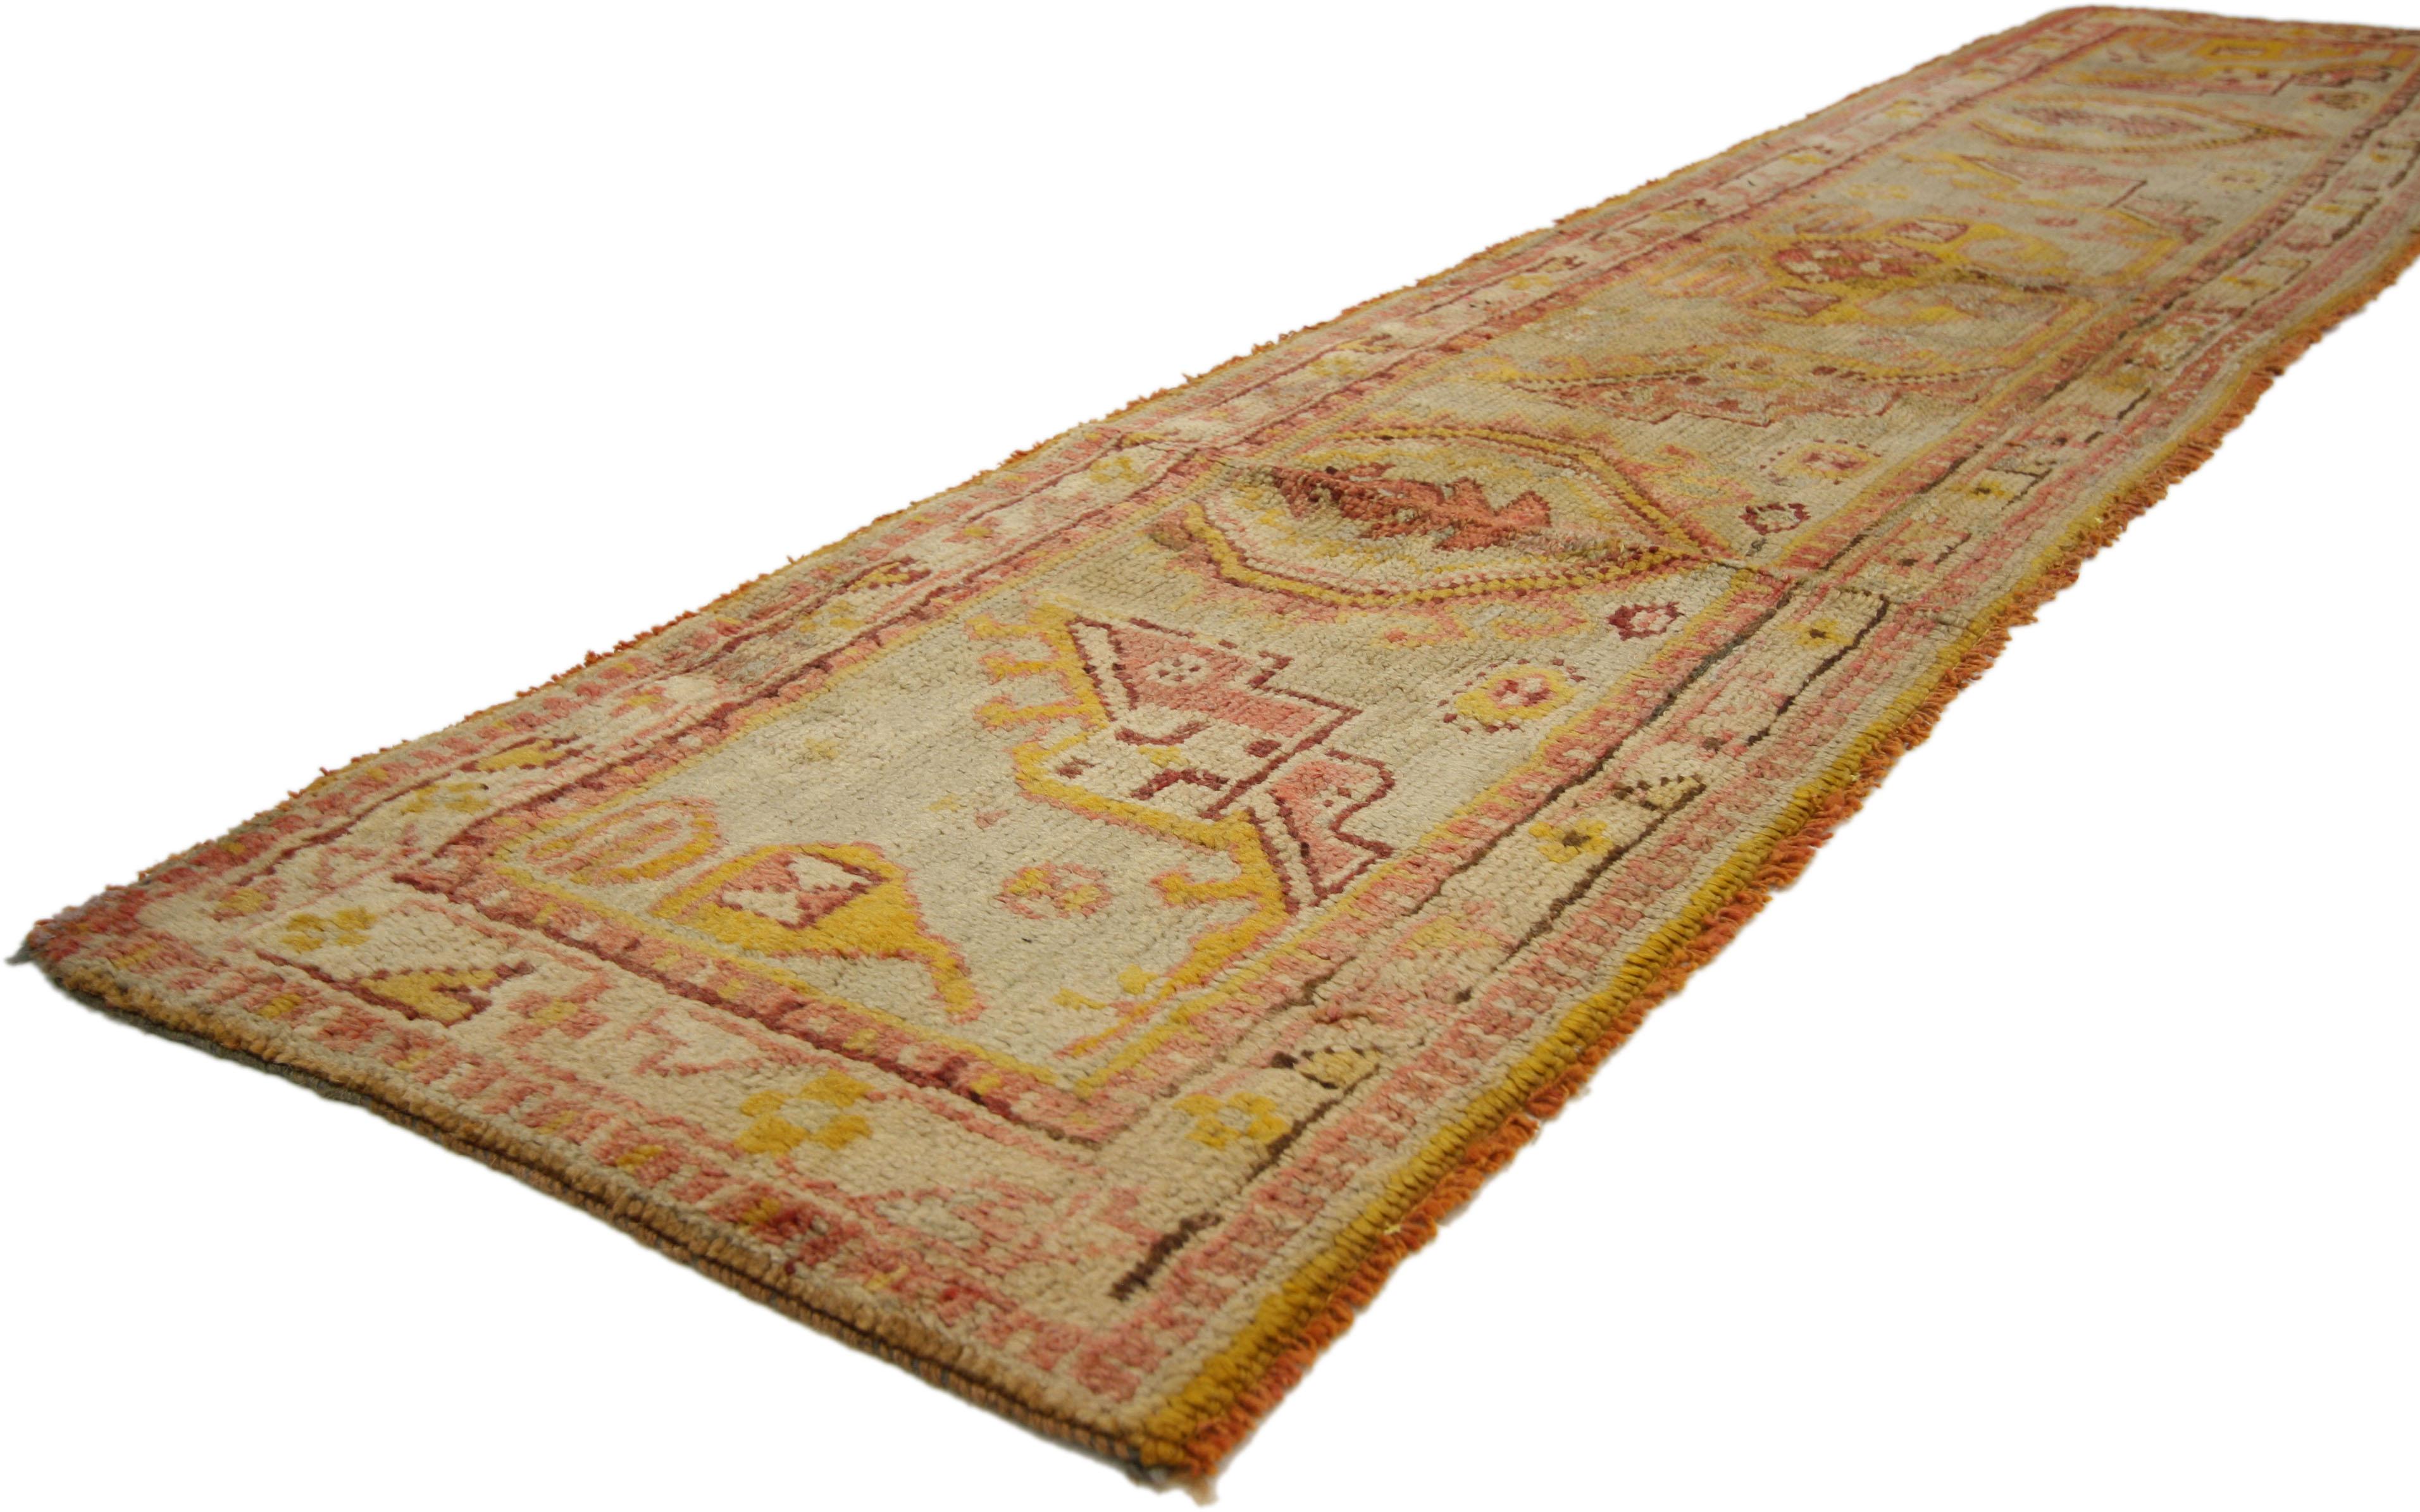 50879 Rare Antique Turkish Sampler Wagireh Oushak Hallway Runner 02'00 x 08'10. This hand-knotted wool antique Turkish Oushak hallway runner is known as a sampler or wagireh Oushak sampler runner. This is from the Late 19th Century, circa 1880's.